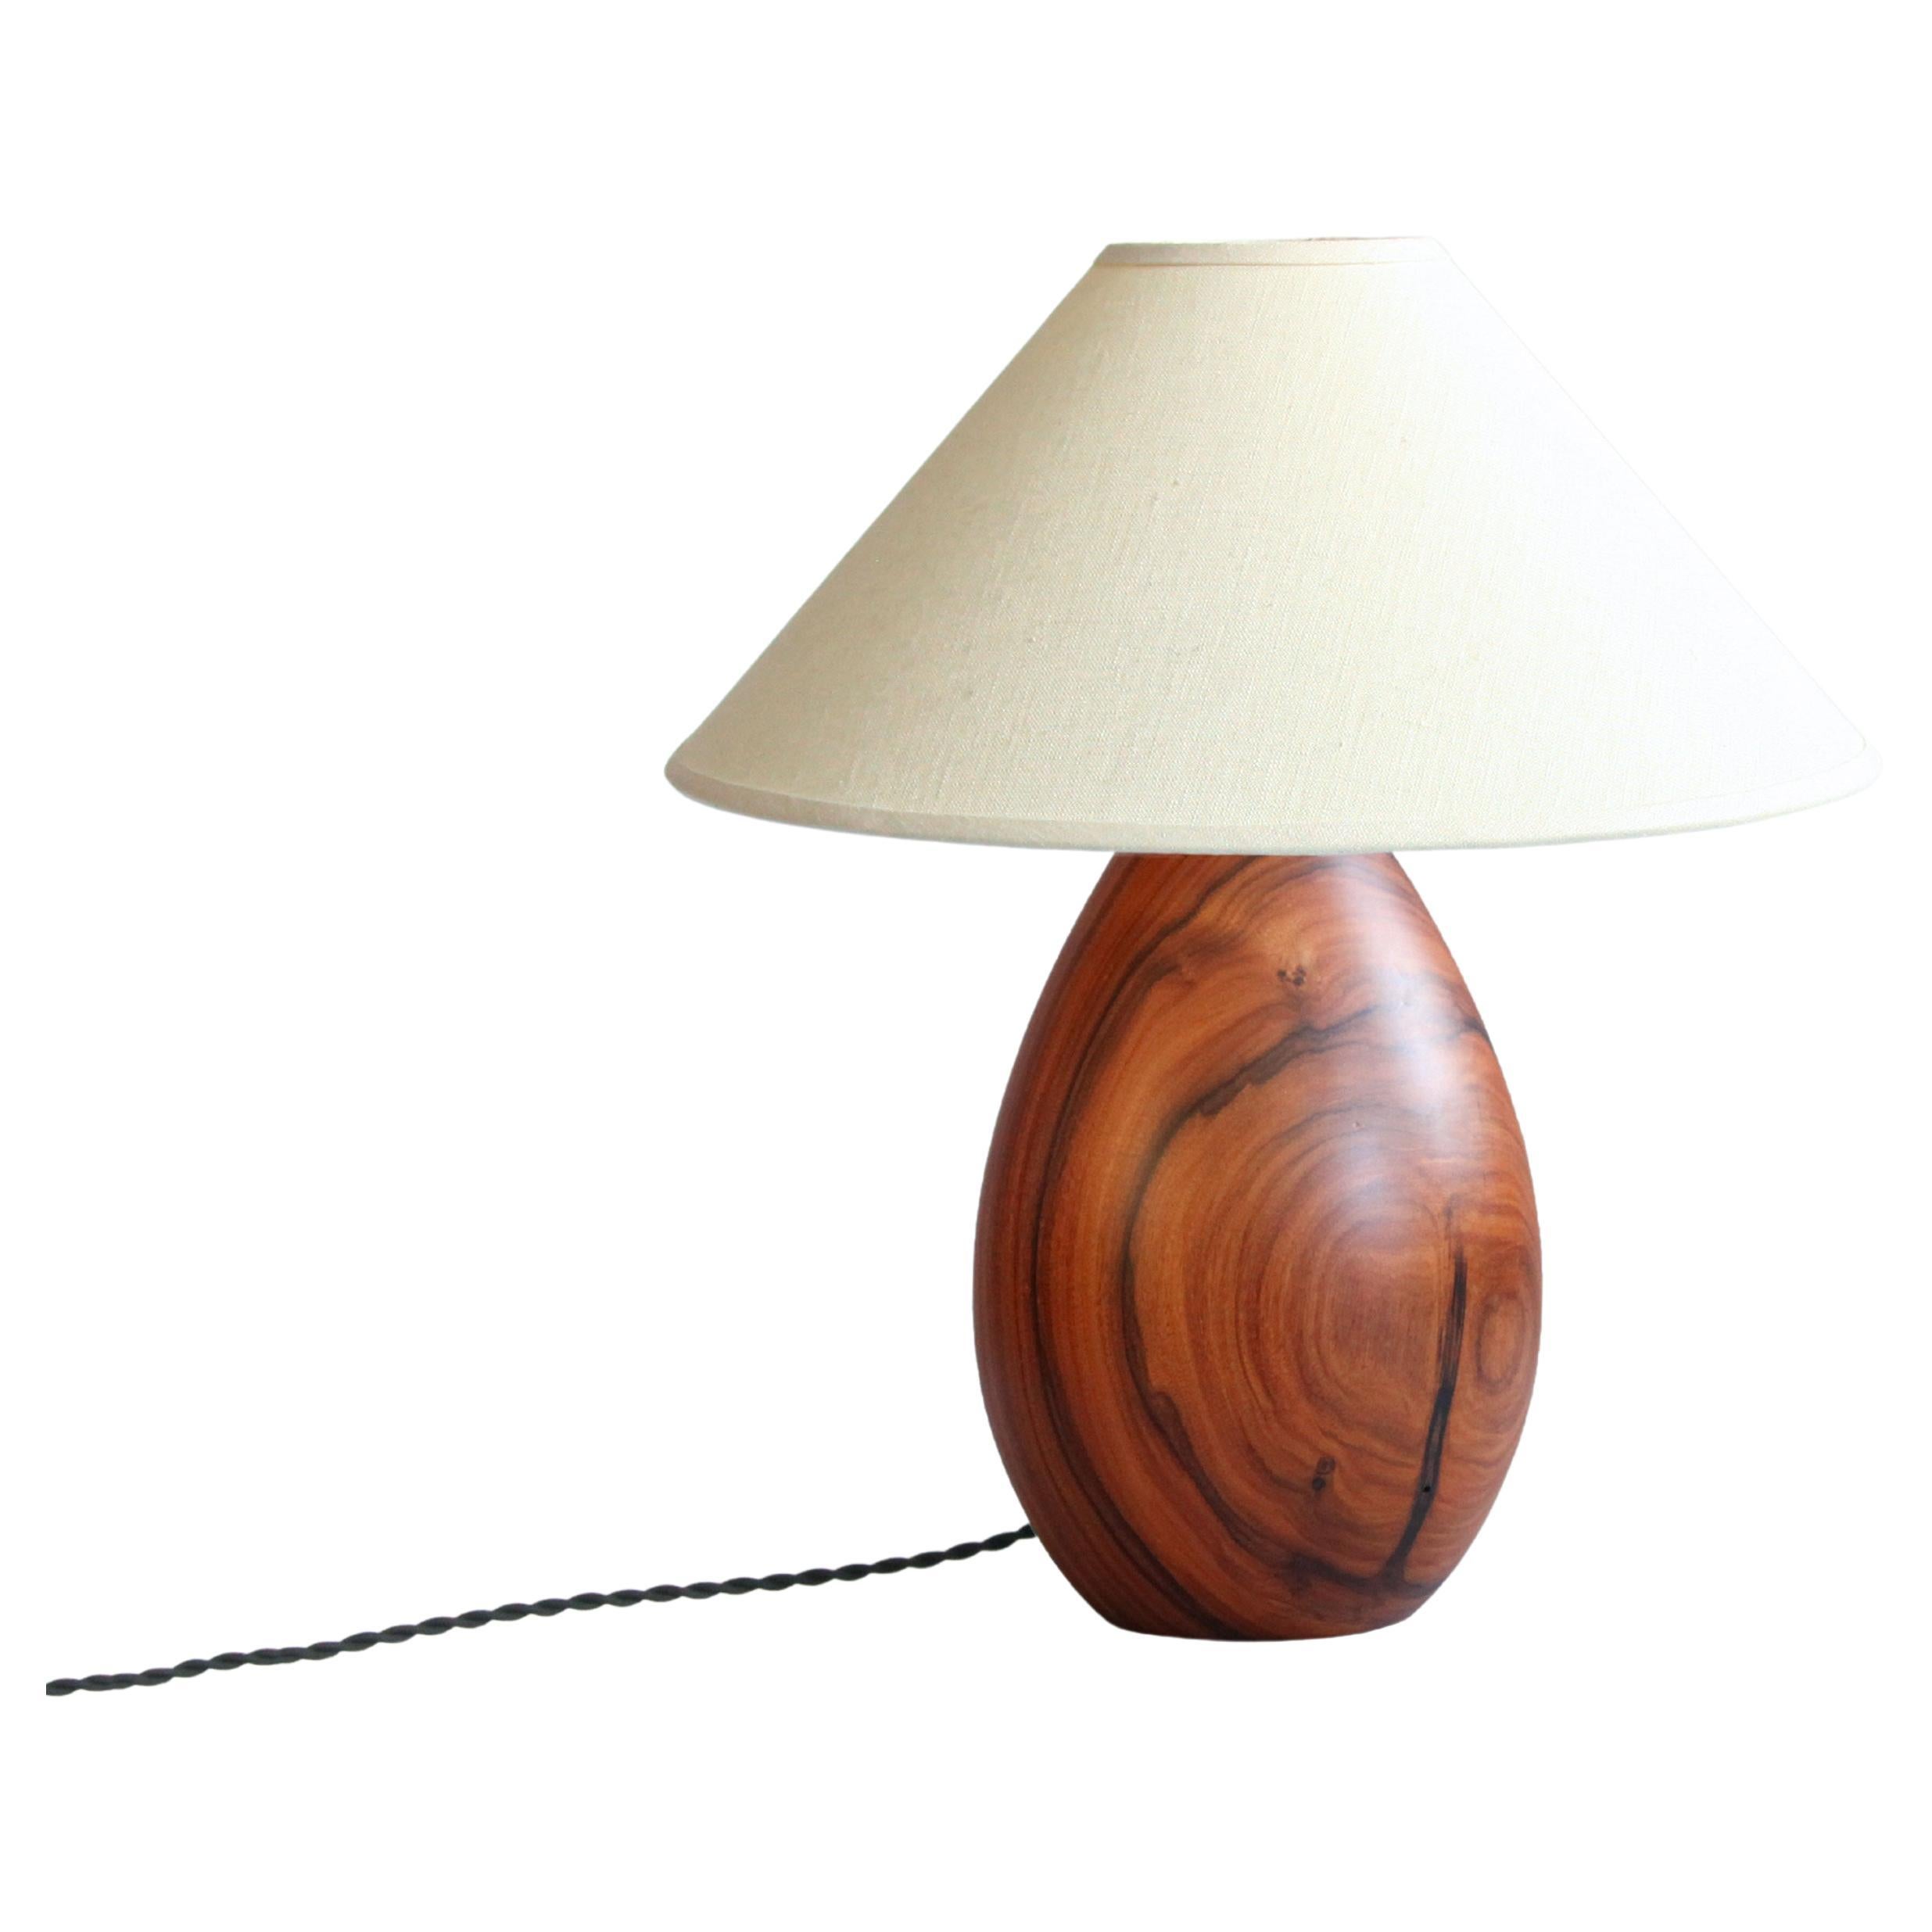 Tropical Hardwood Lamp and White Linen Shade, Small Medium, Árbol Collection, 29 For Sale